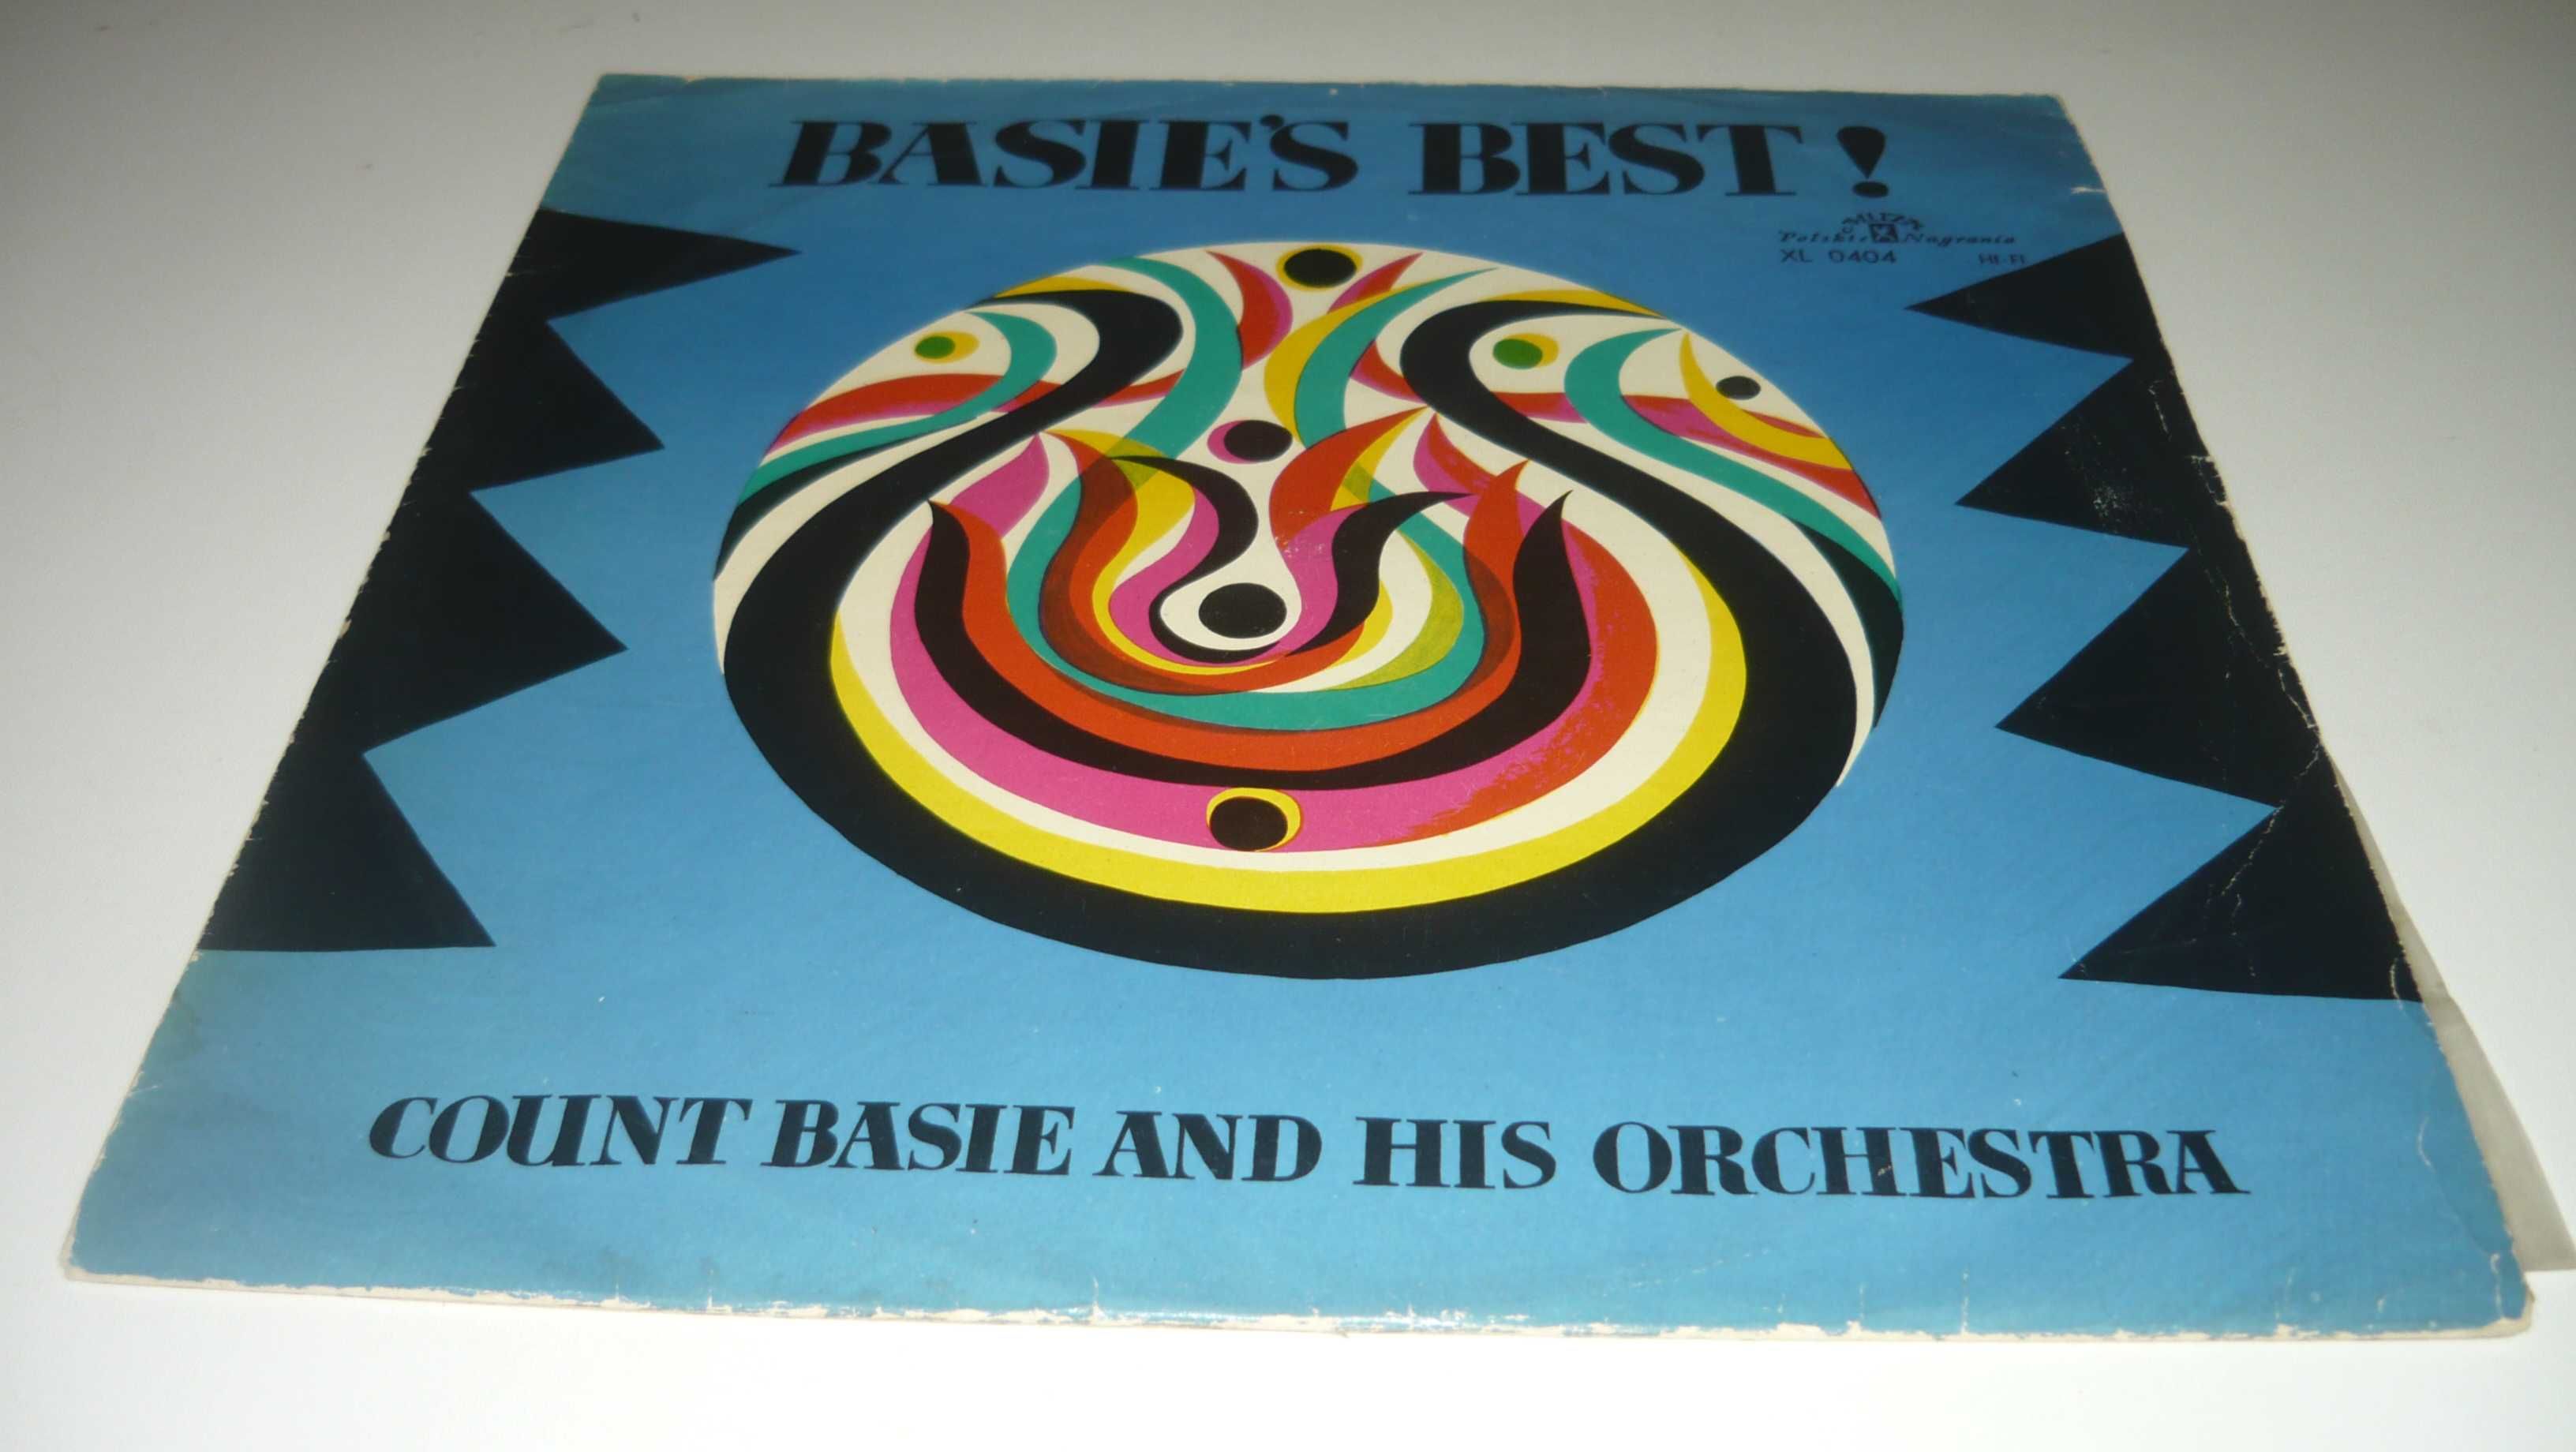 Basie"s Best ! Count Basie and his Orchestra  XL-0404 LP